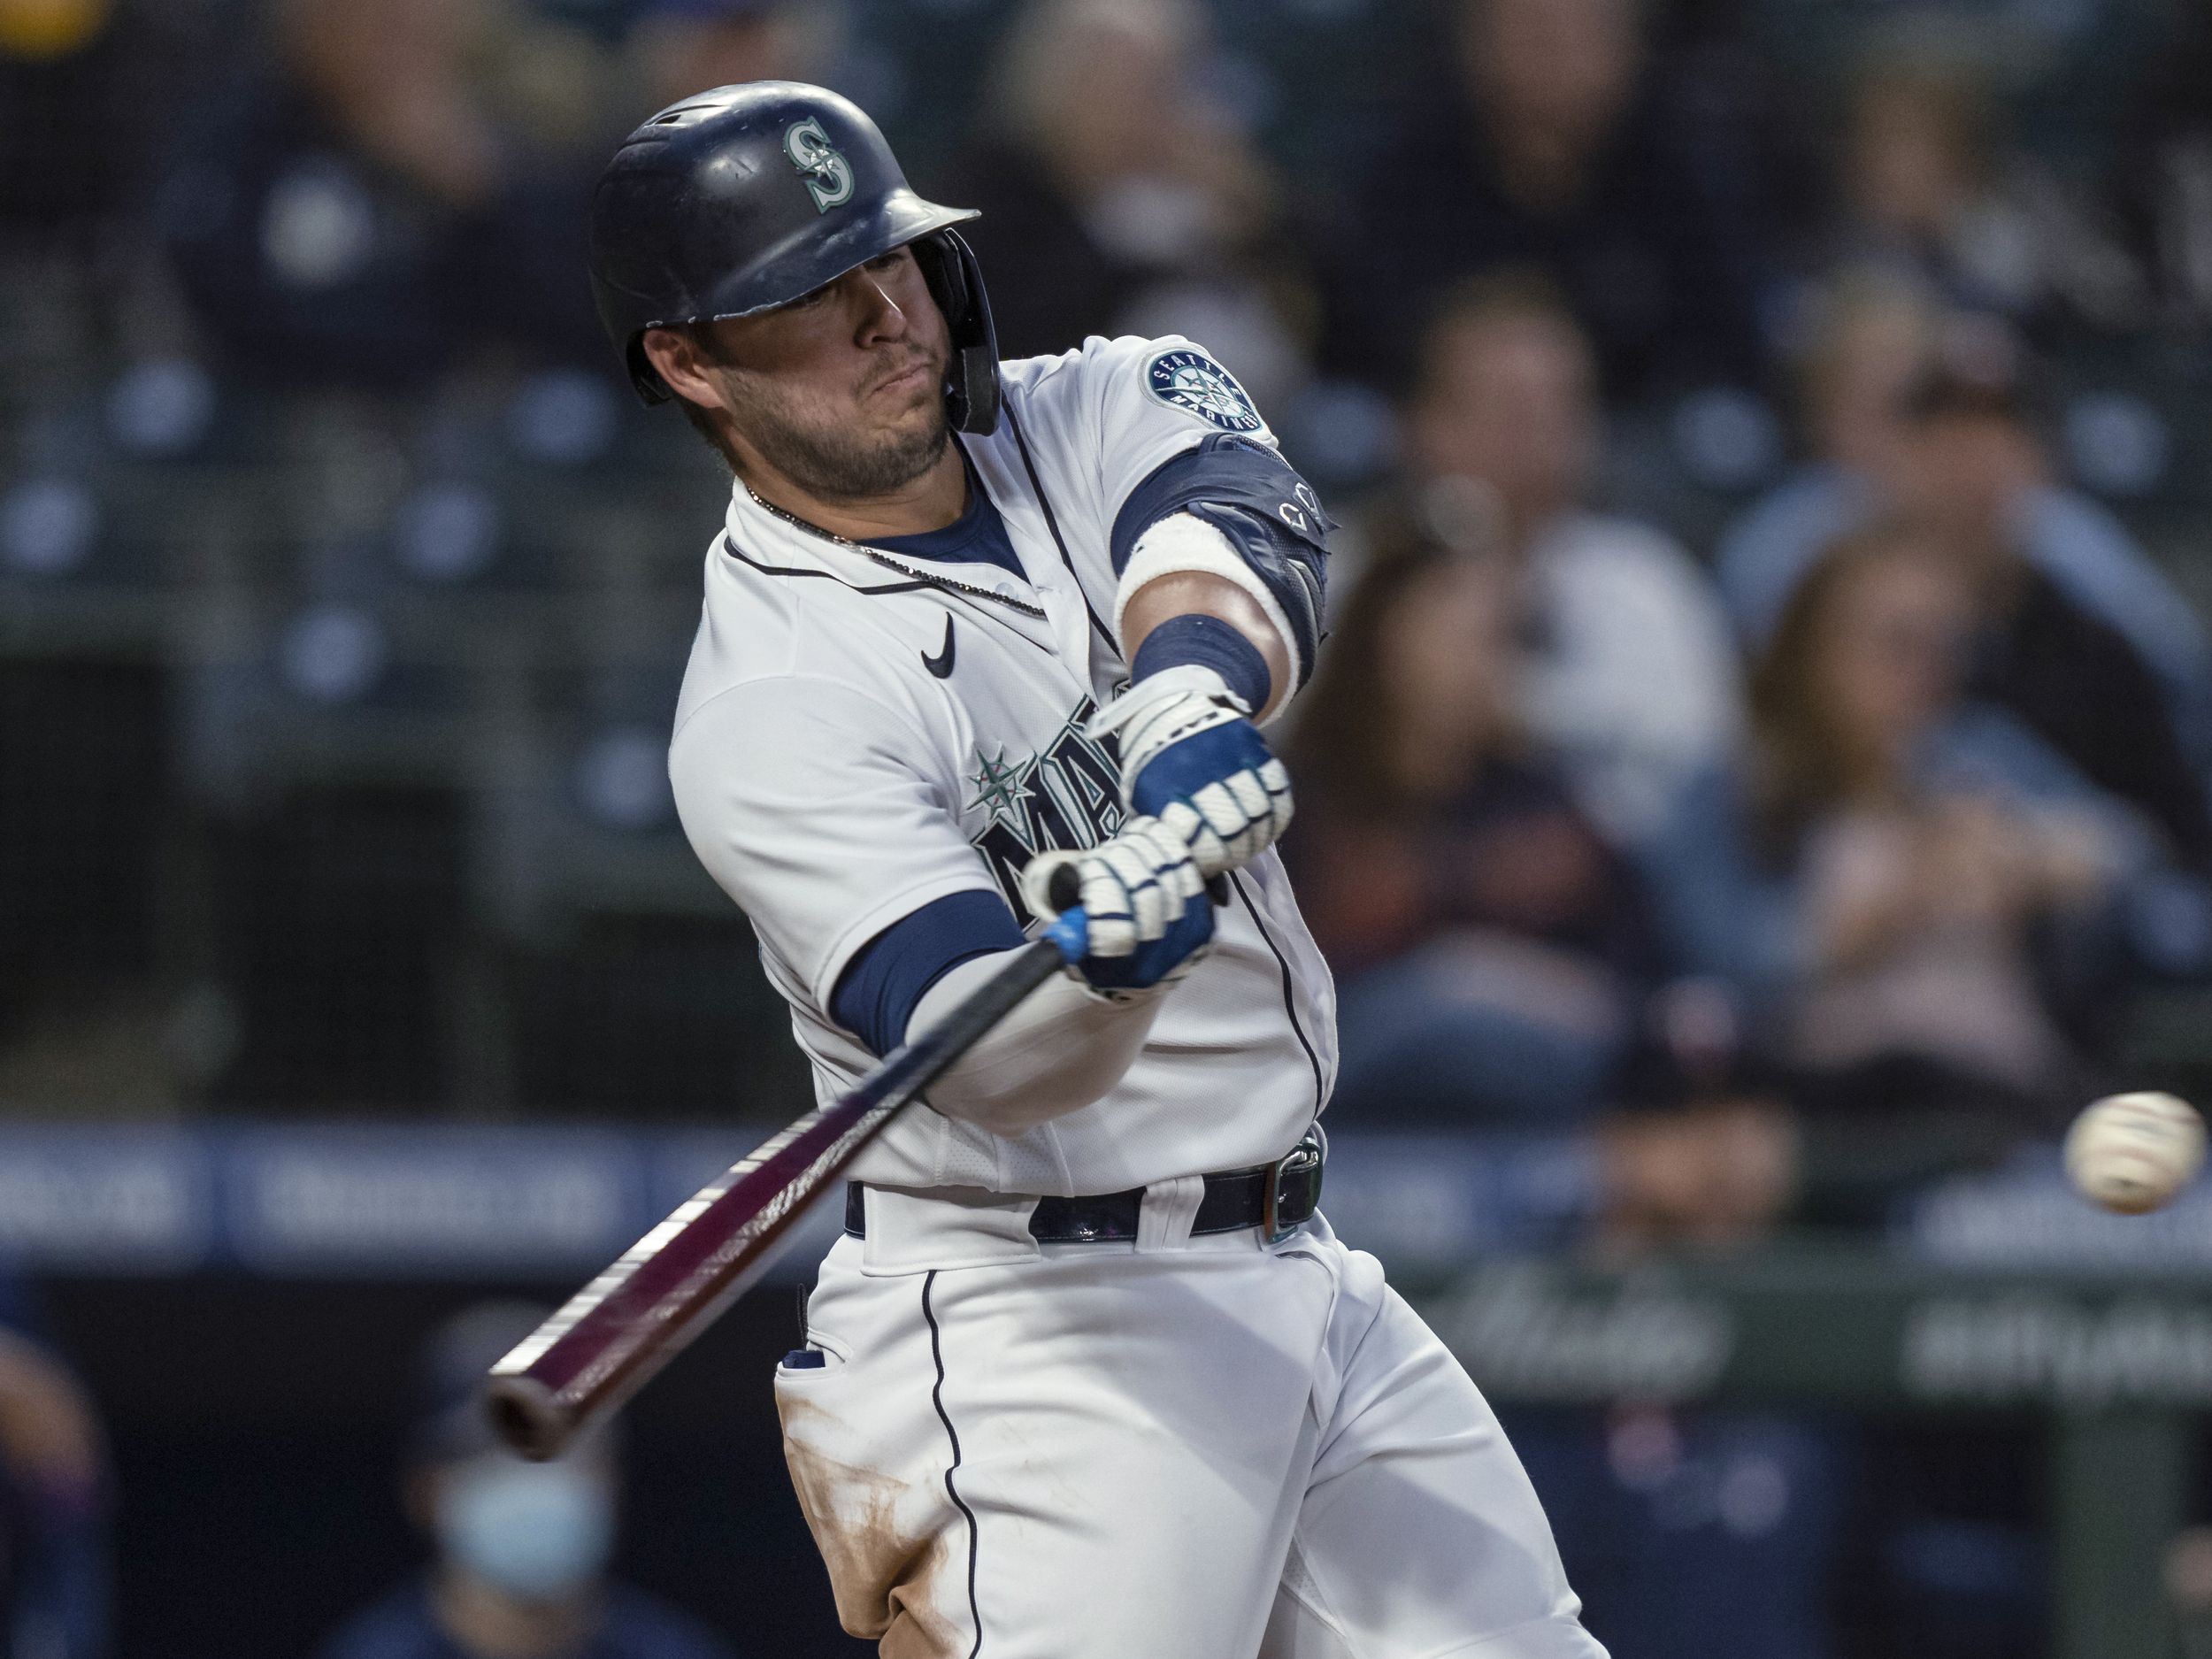 Now that he's healthy and back in Mariners lineup, Ty France is hitting it  all over the park